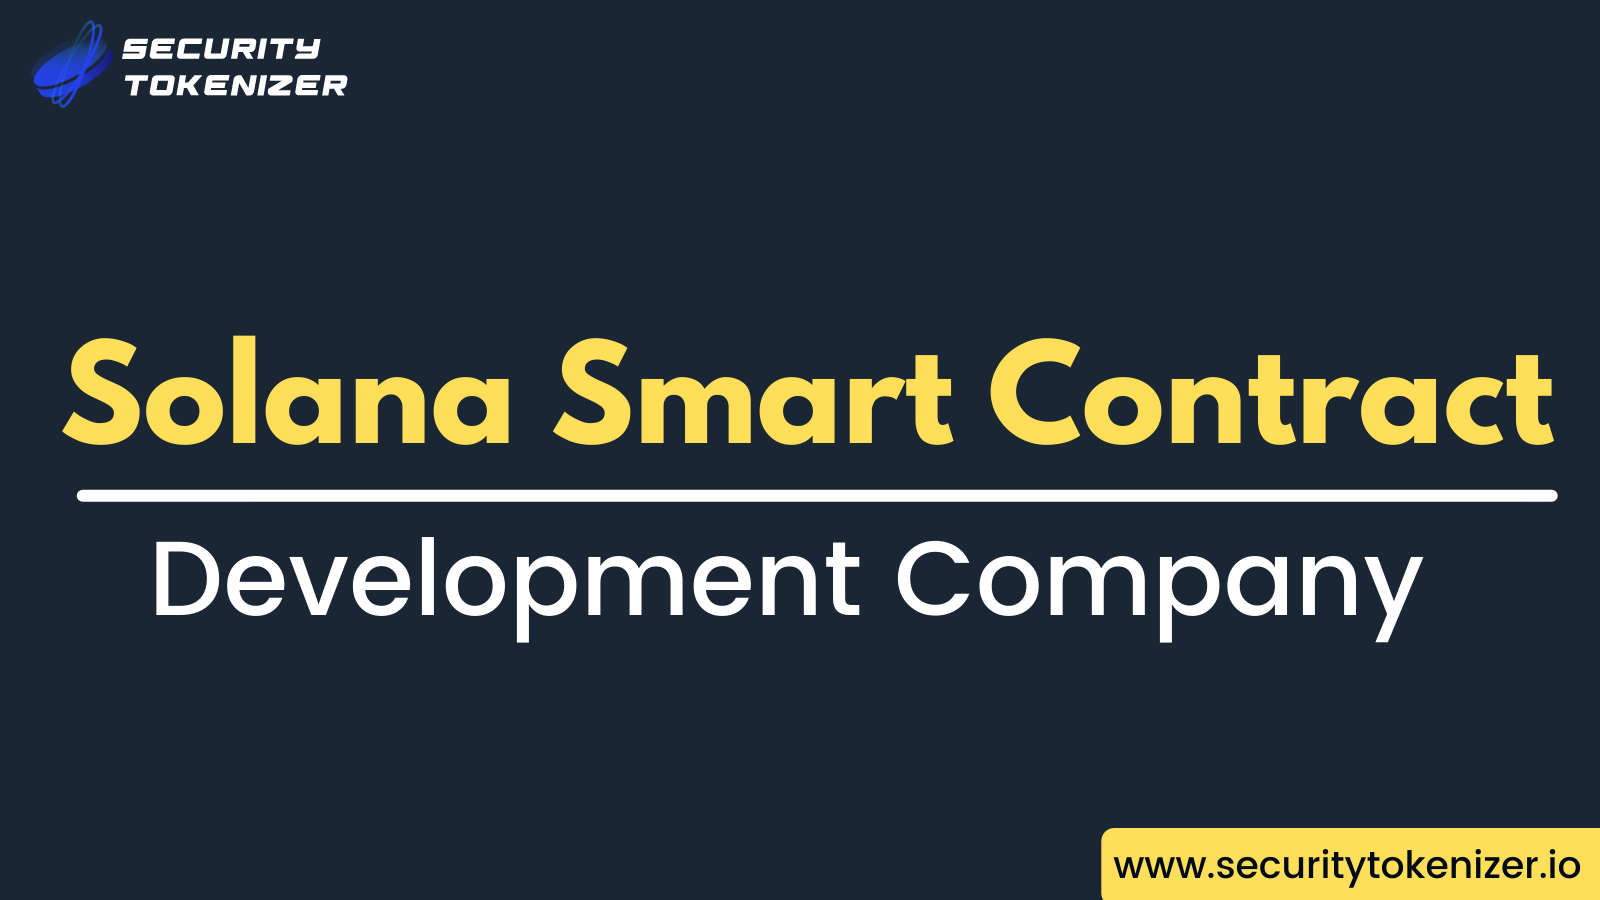 Article about Solana Smart Contract Development and its Benefits